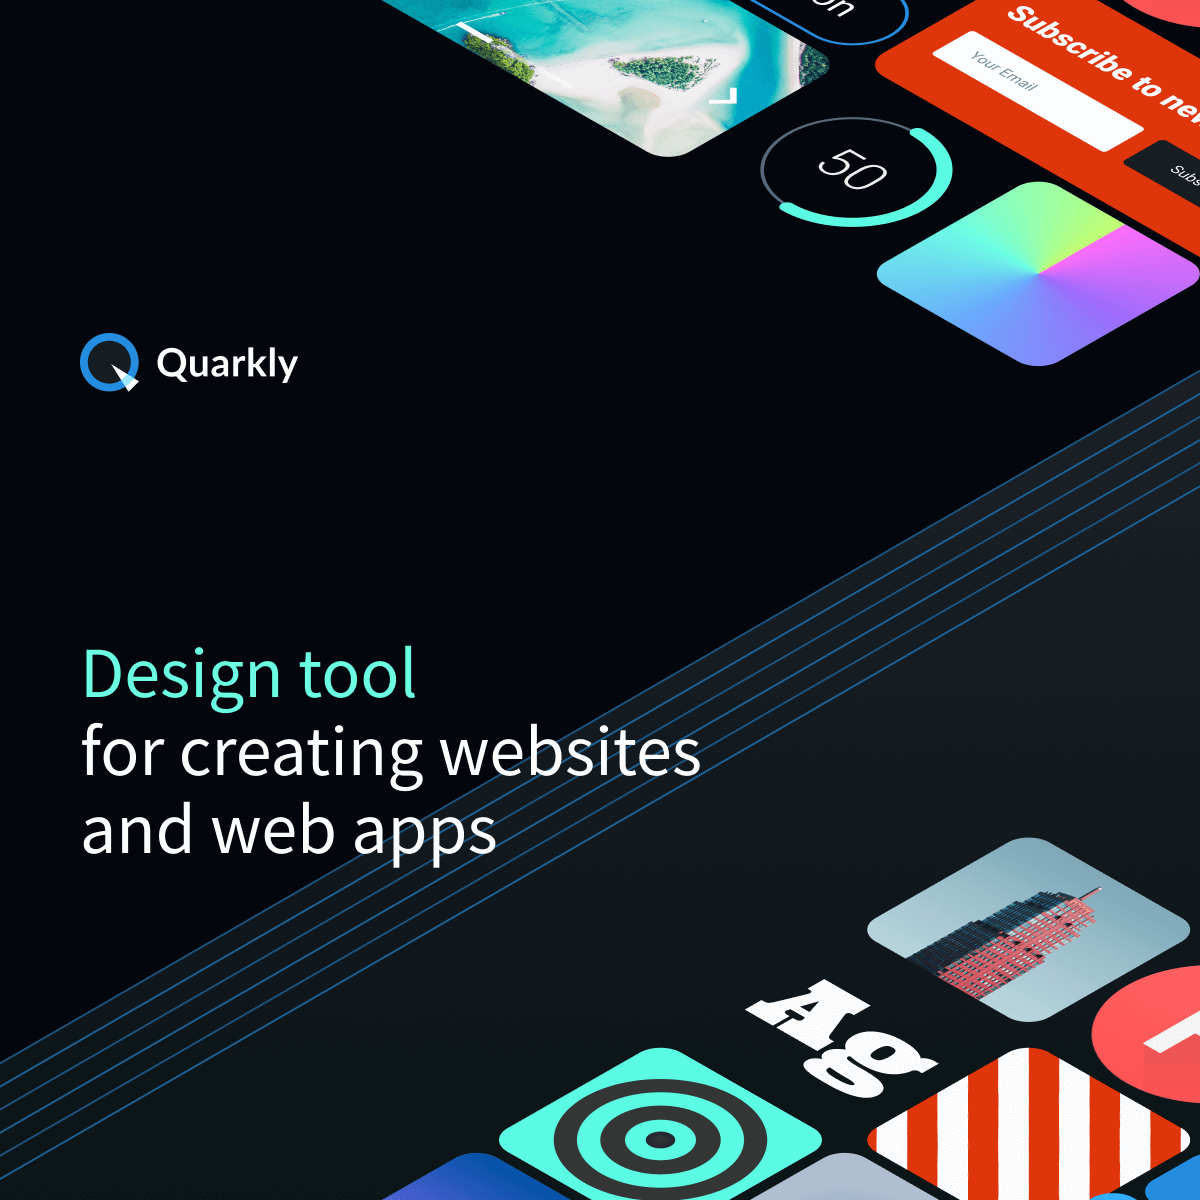 Quarkly - Design tool for creating websites and web apps.